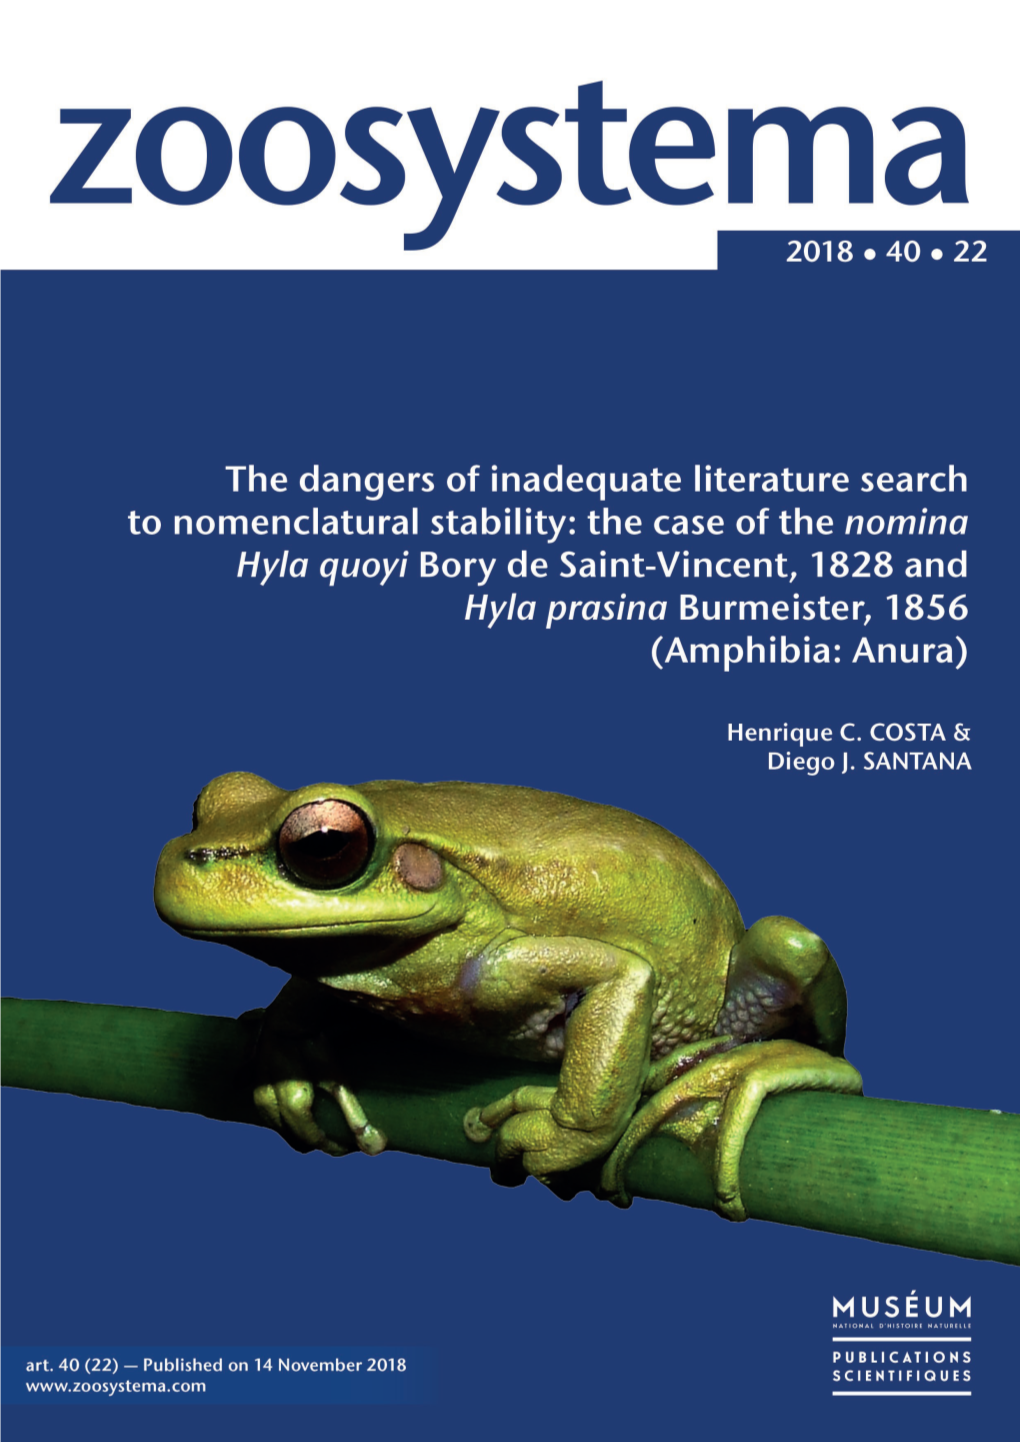 The Dangers of Inadequate Literature Search to Nomenclatural Stability: the Case of the Nomina Hyla Quoyi Bory De Saint-Vincent